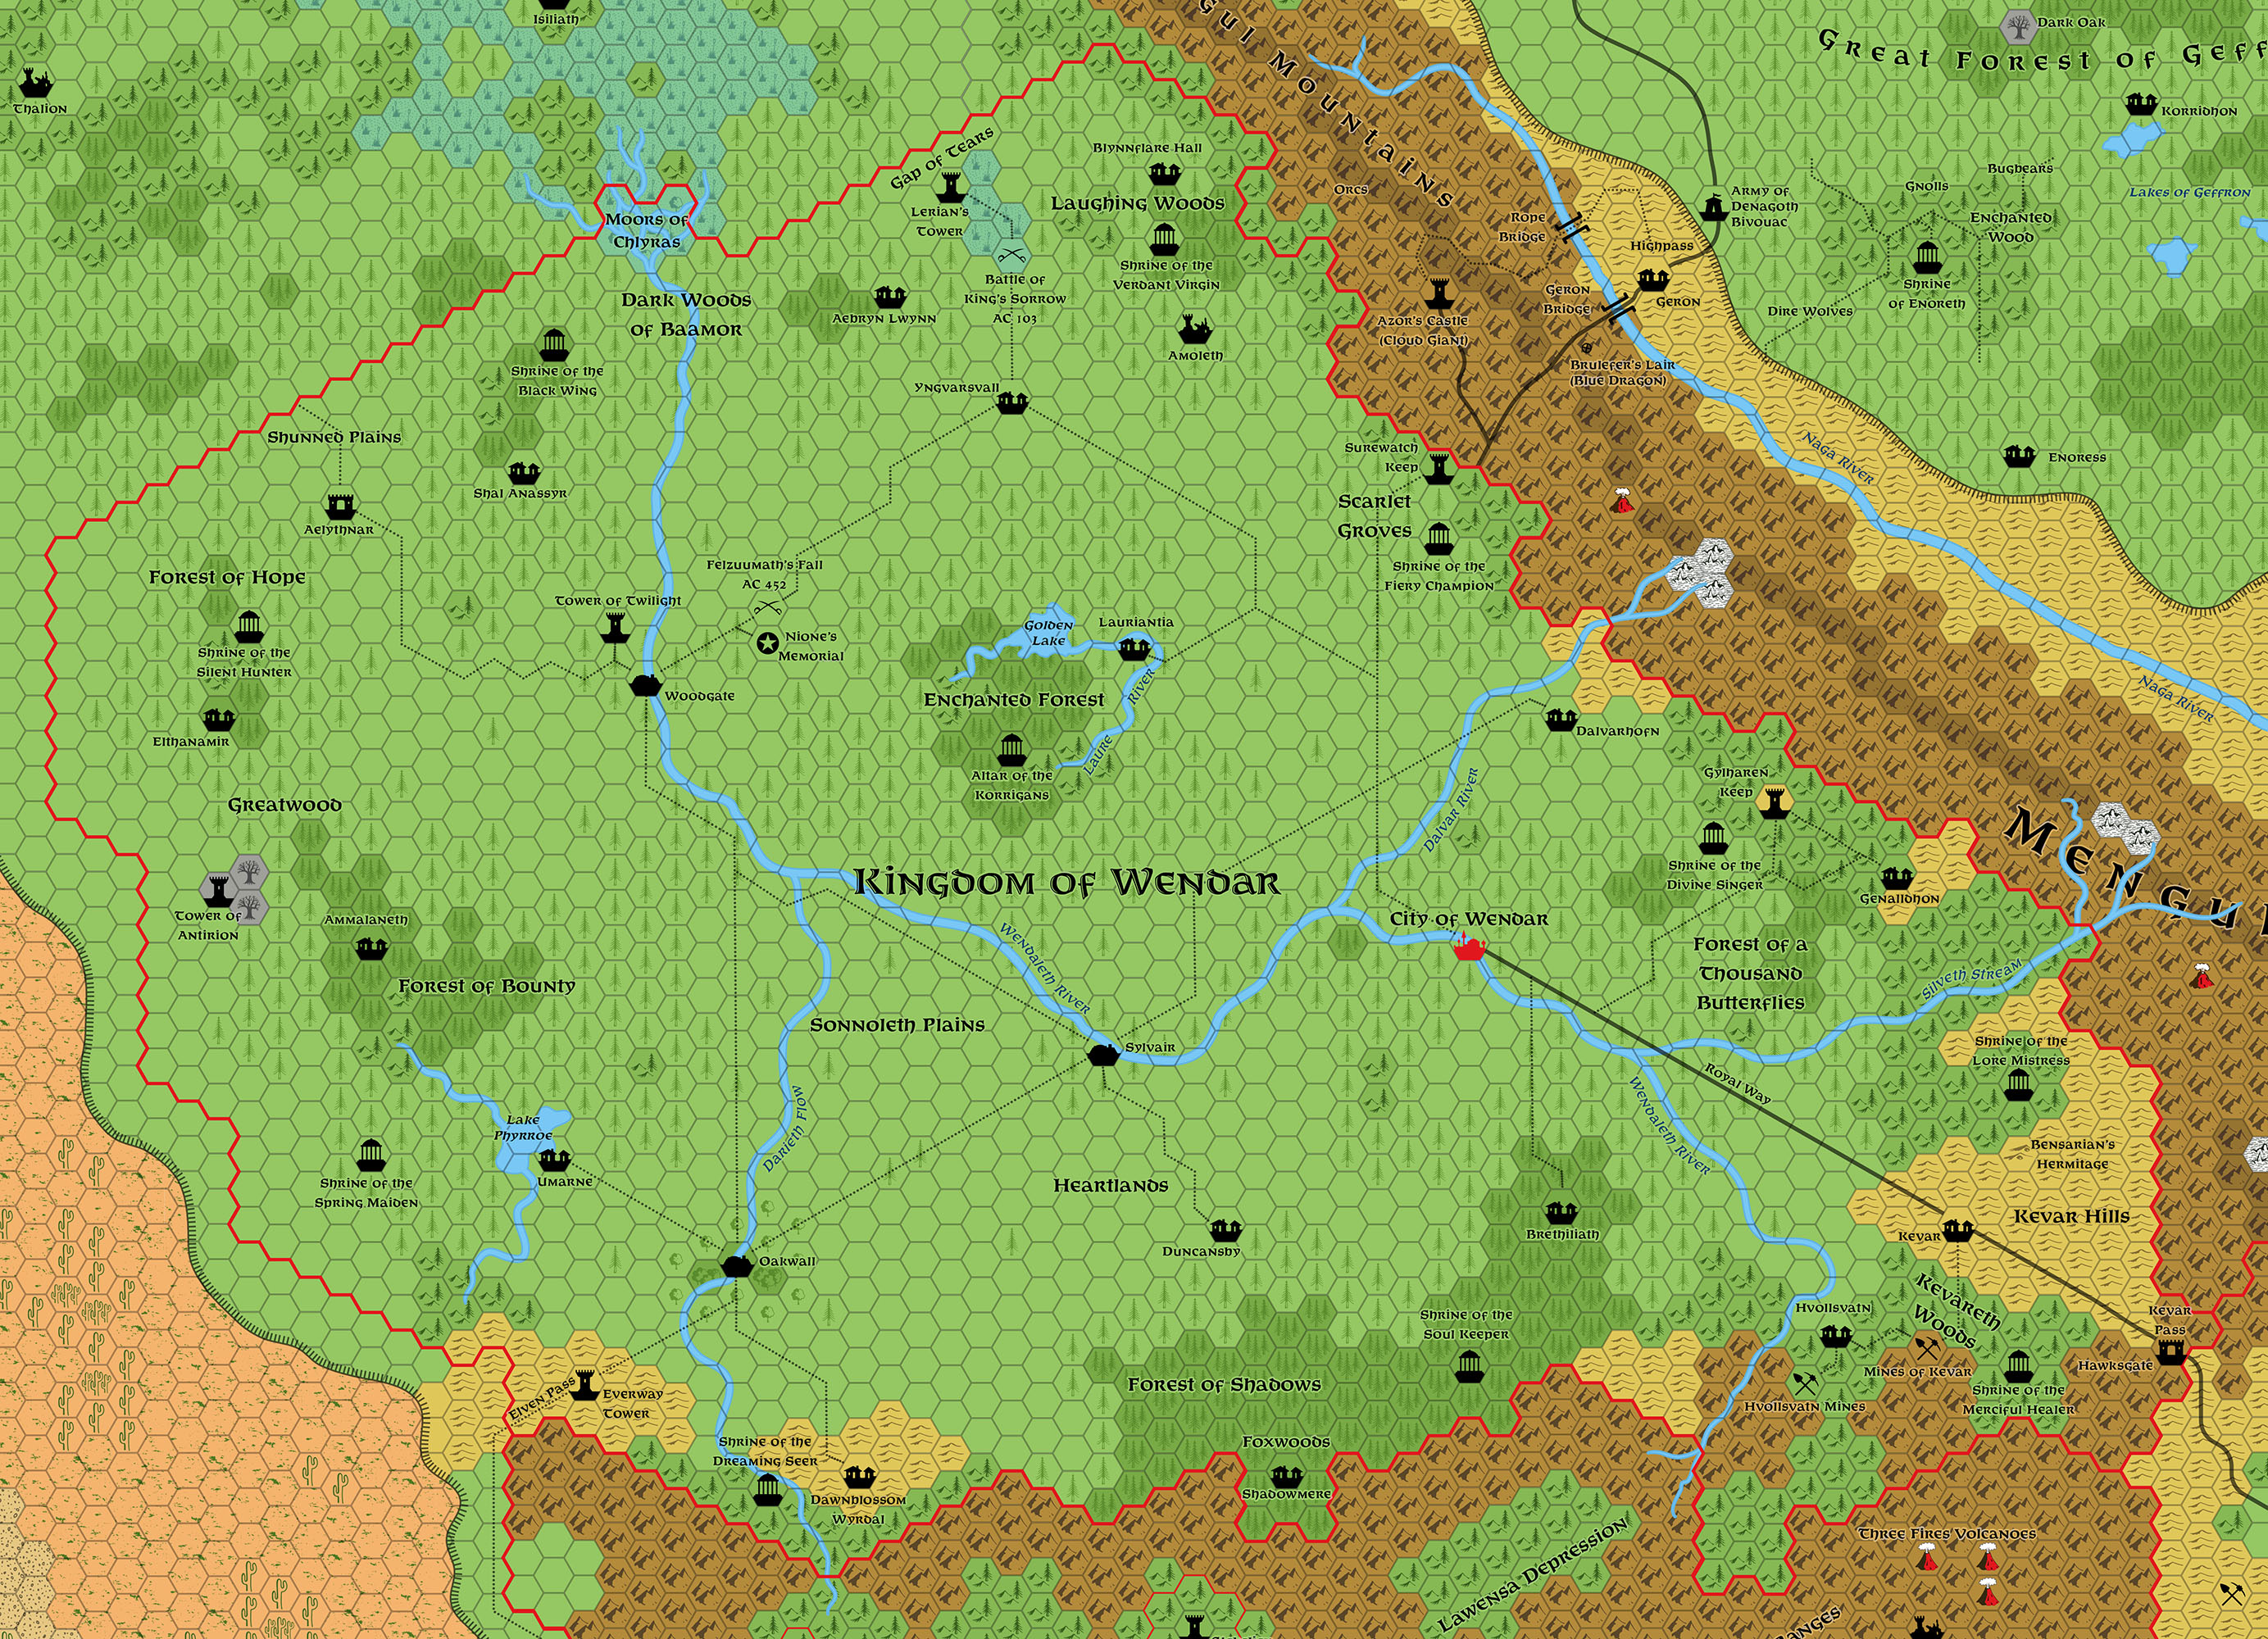 Updated map of the Kingdom of Wendar, 8 miles per hex